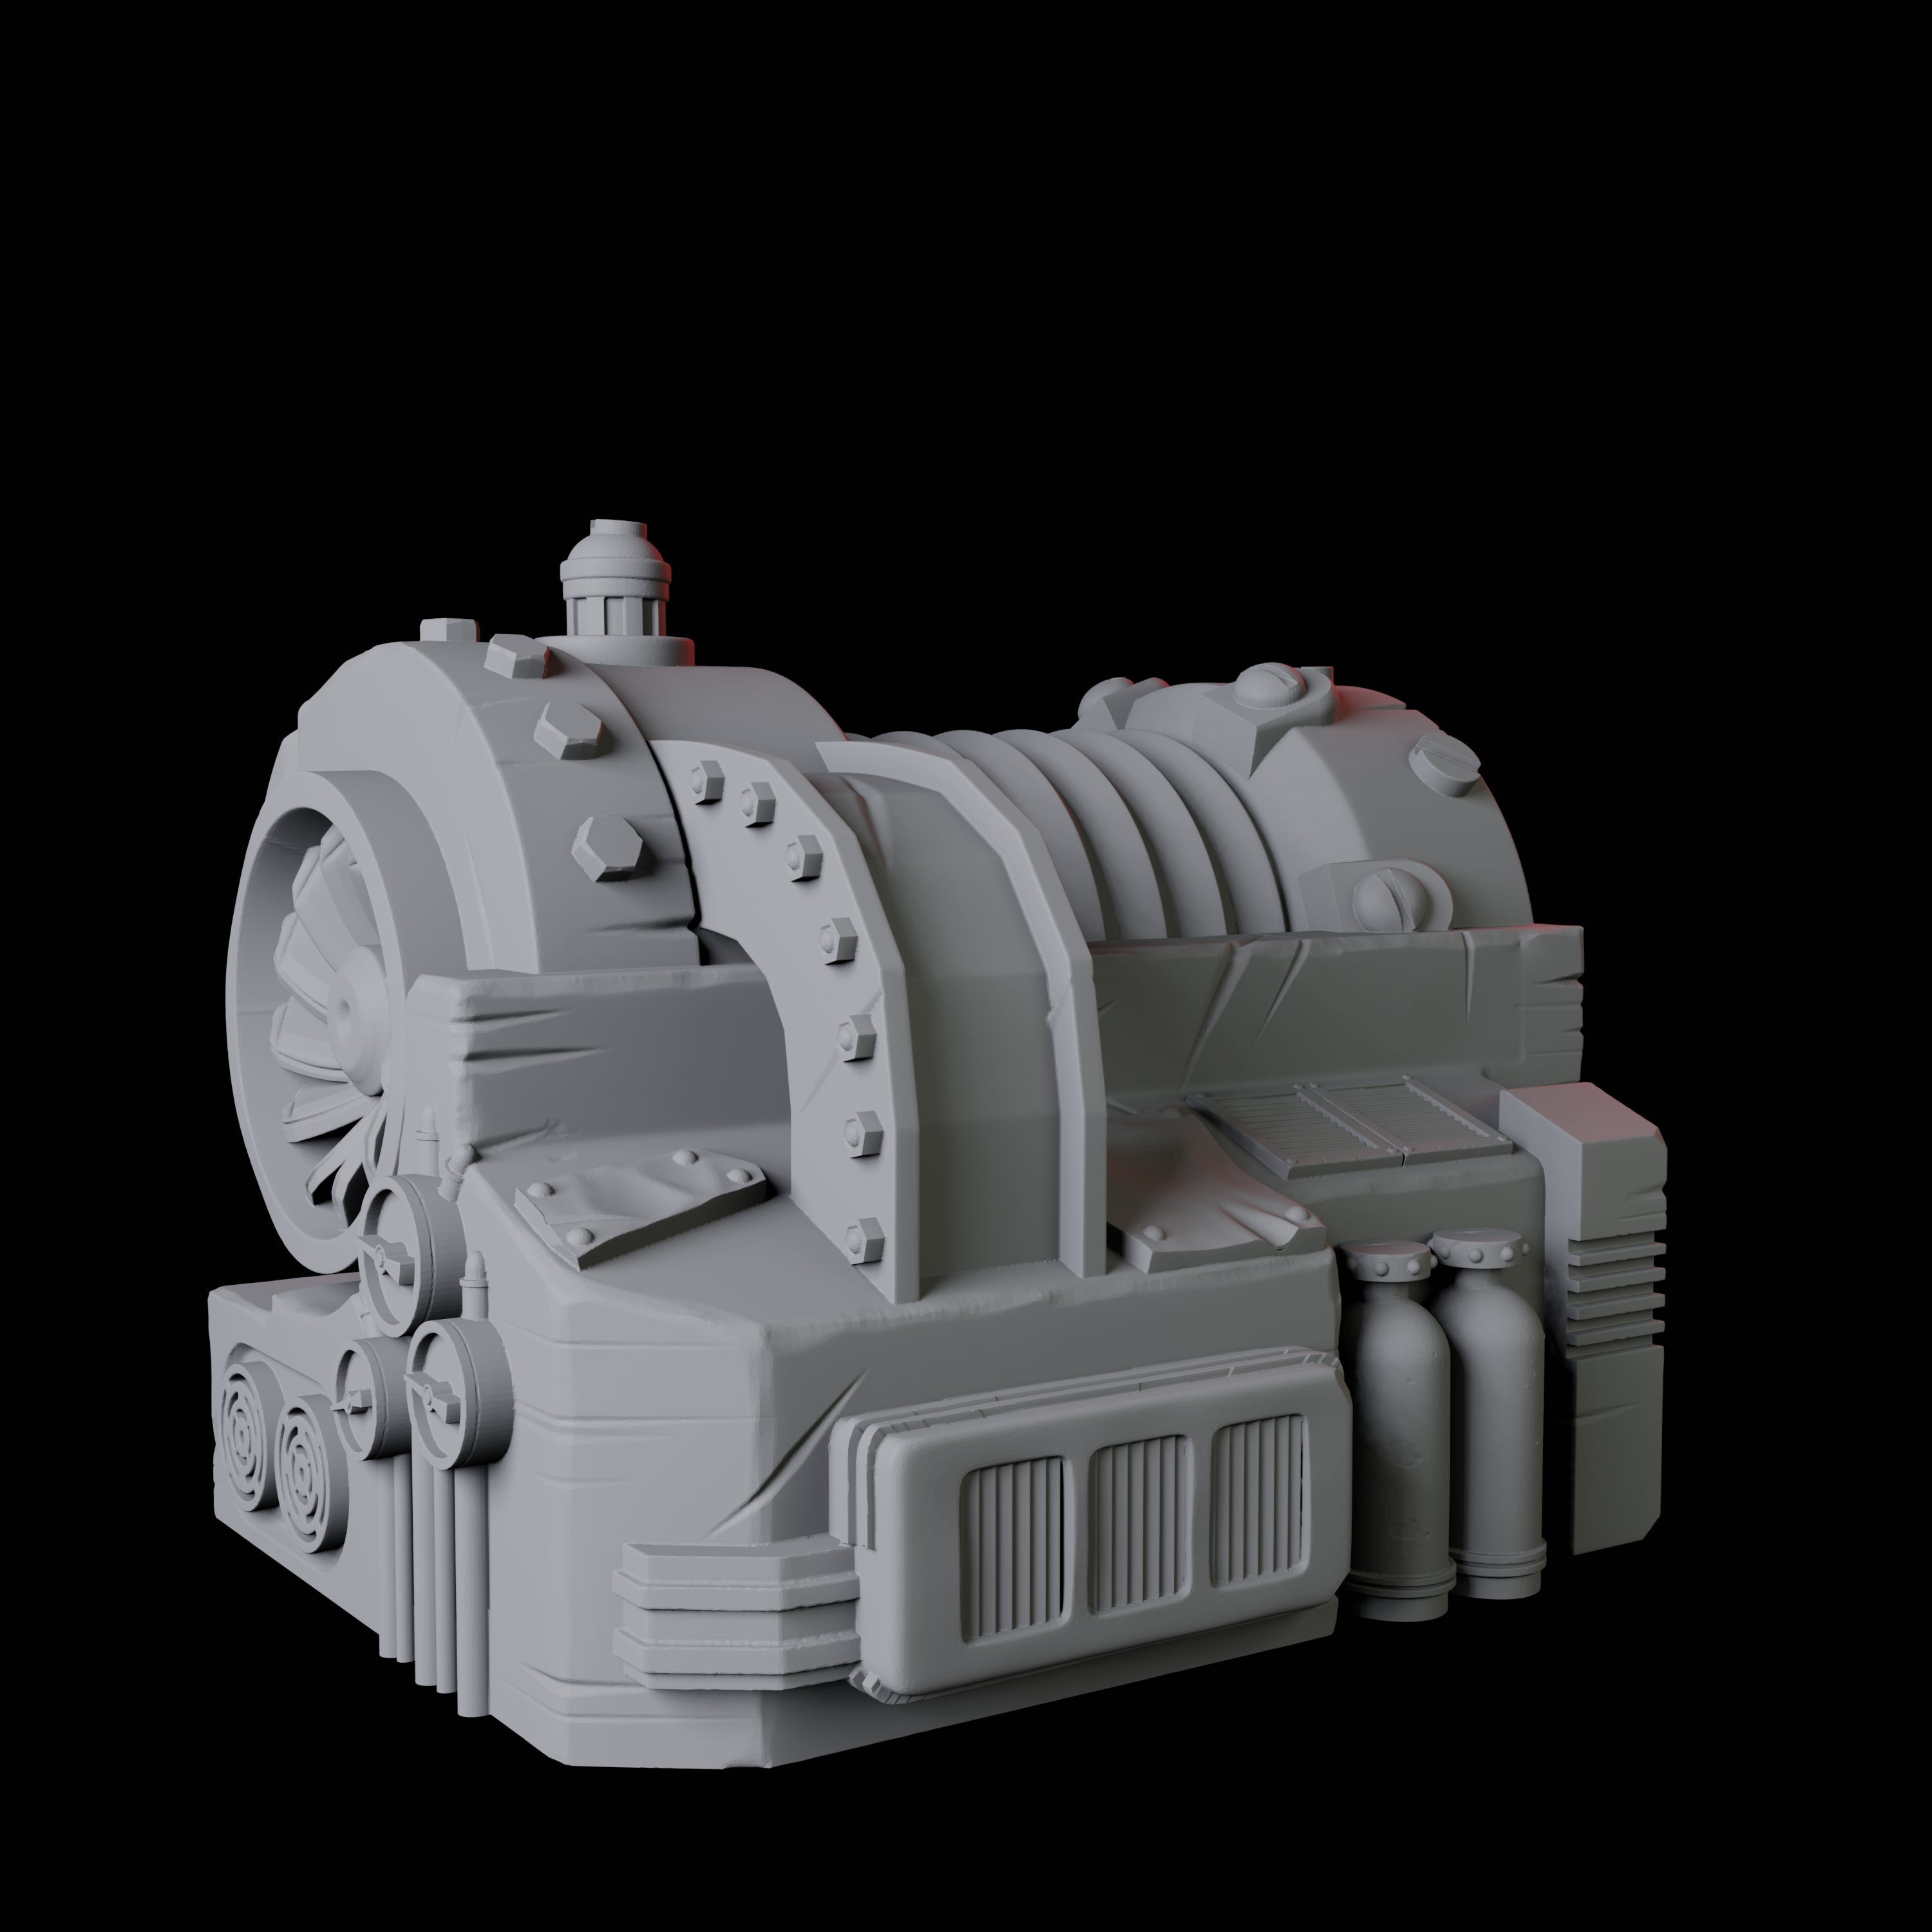 Laboratory Machine E Miniature for Dungeons and Dragons